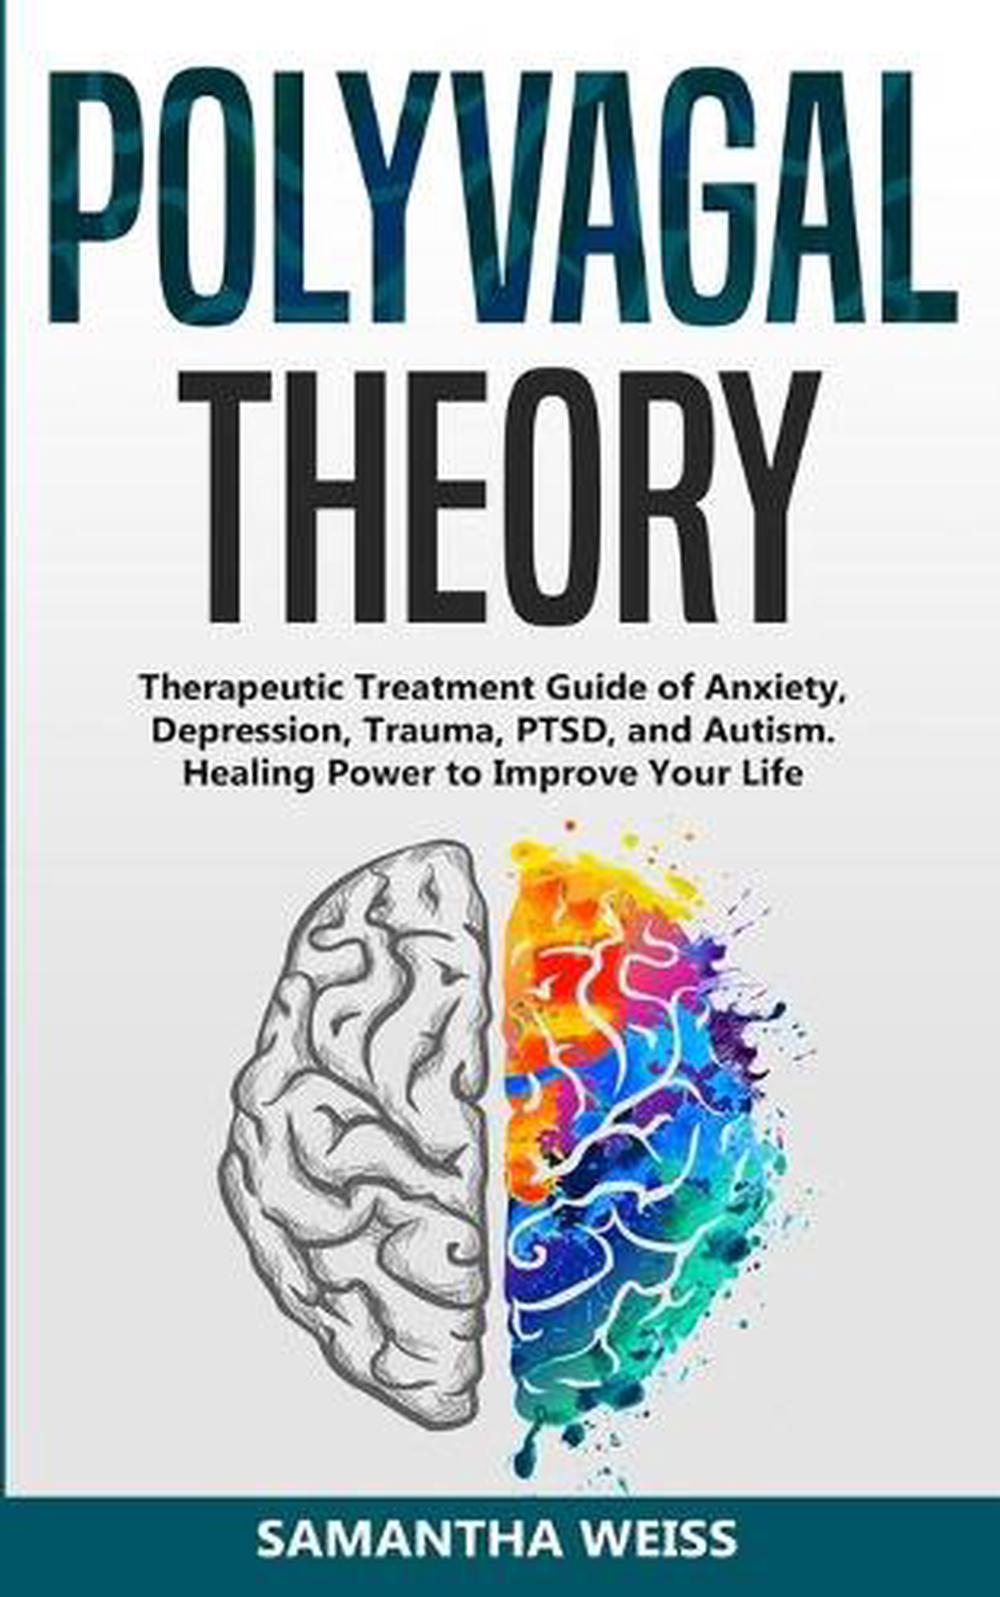 Polyvagal Theory by Samantha Weiss (English) Paperback Book Free ...